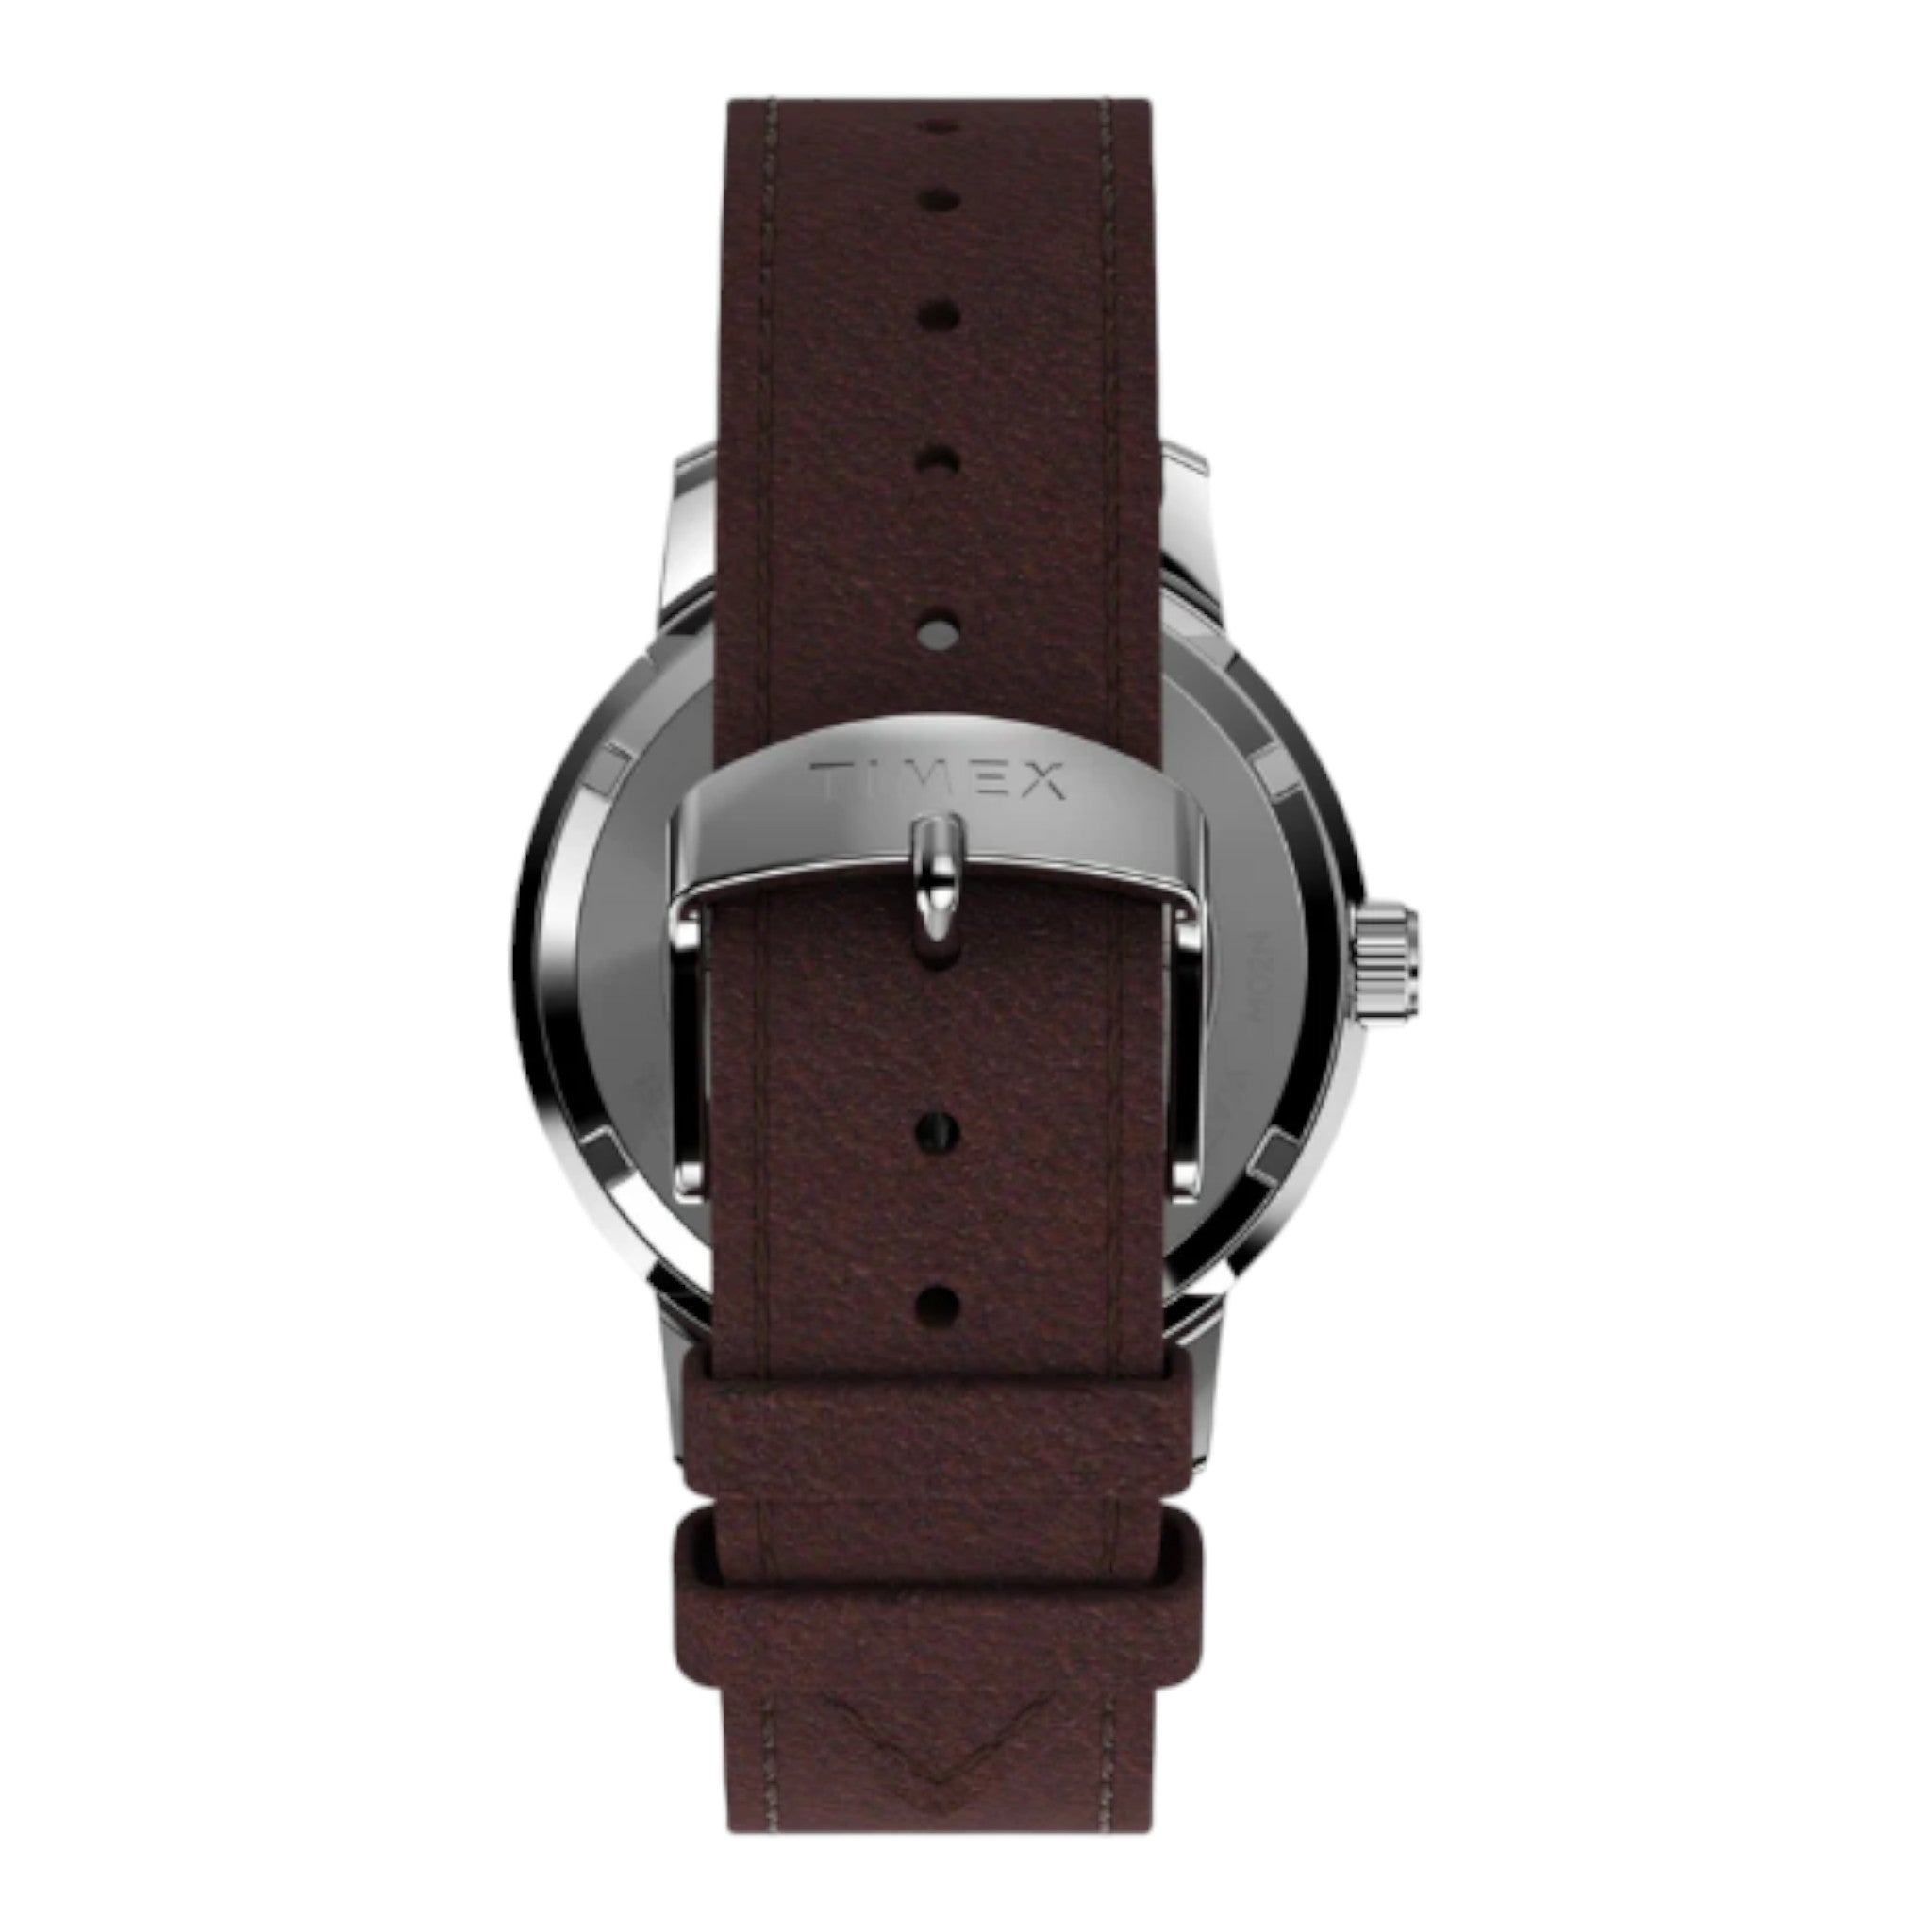 Timex - Marlin Automatic 40mm Leather Strap Watch - Brown